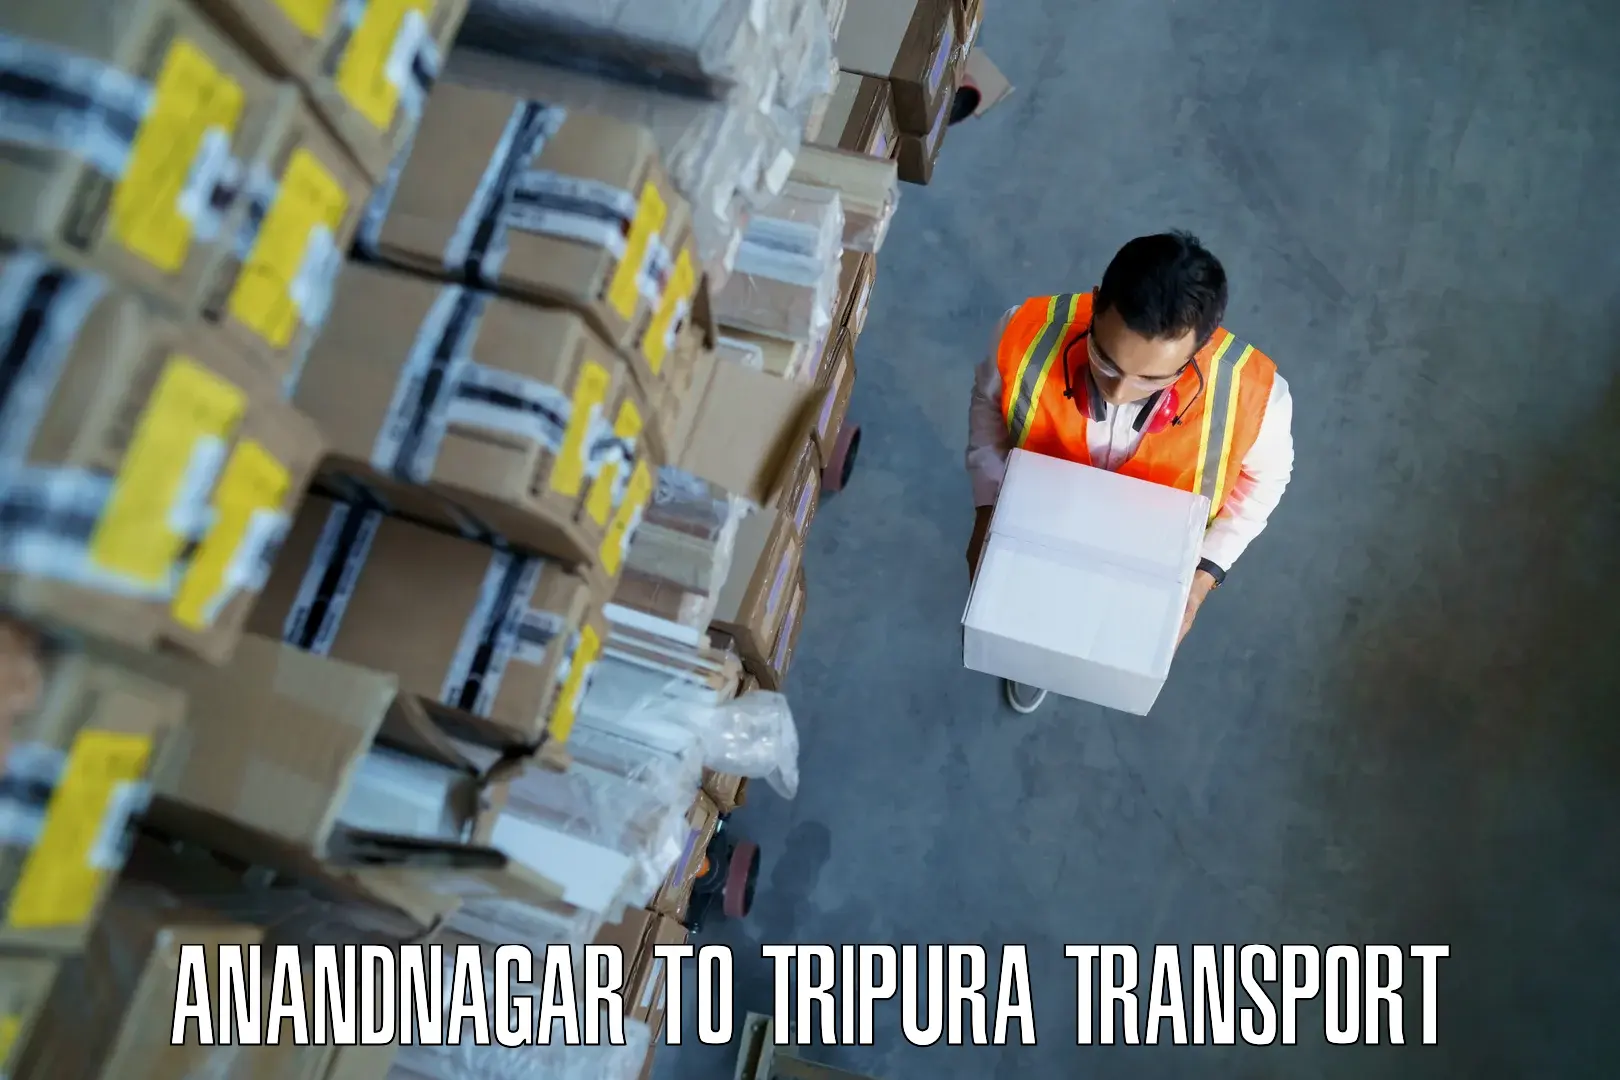 Goods delivery service Anandnagar to Tripura